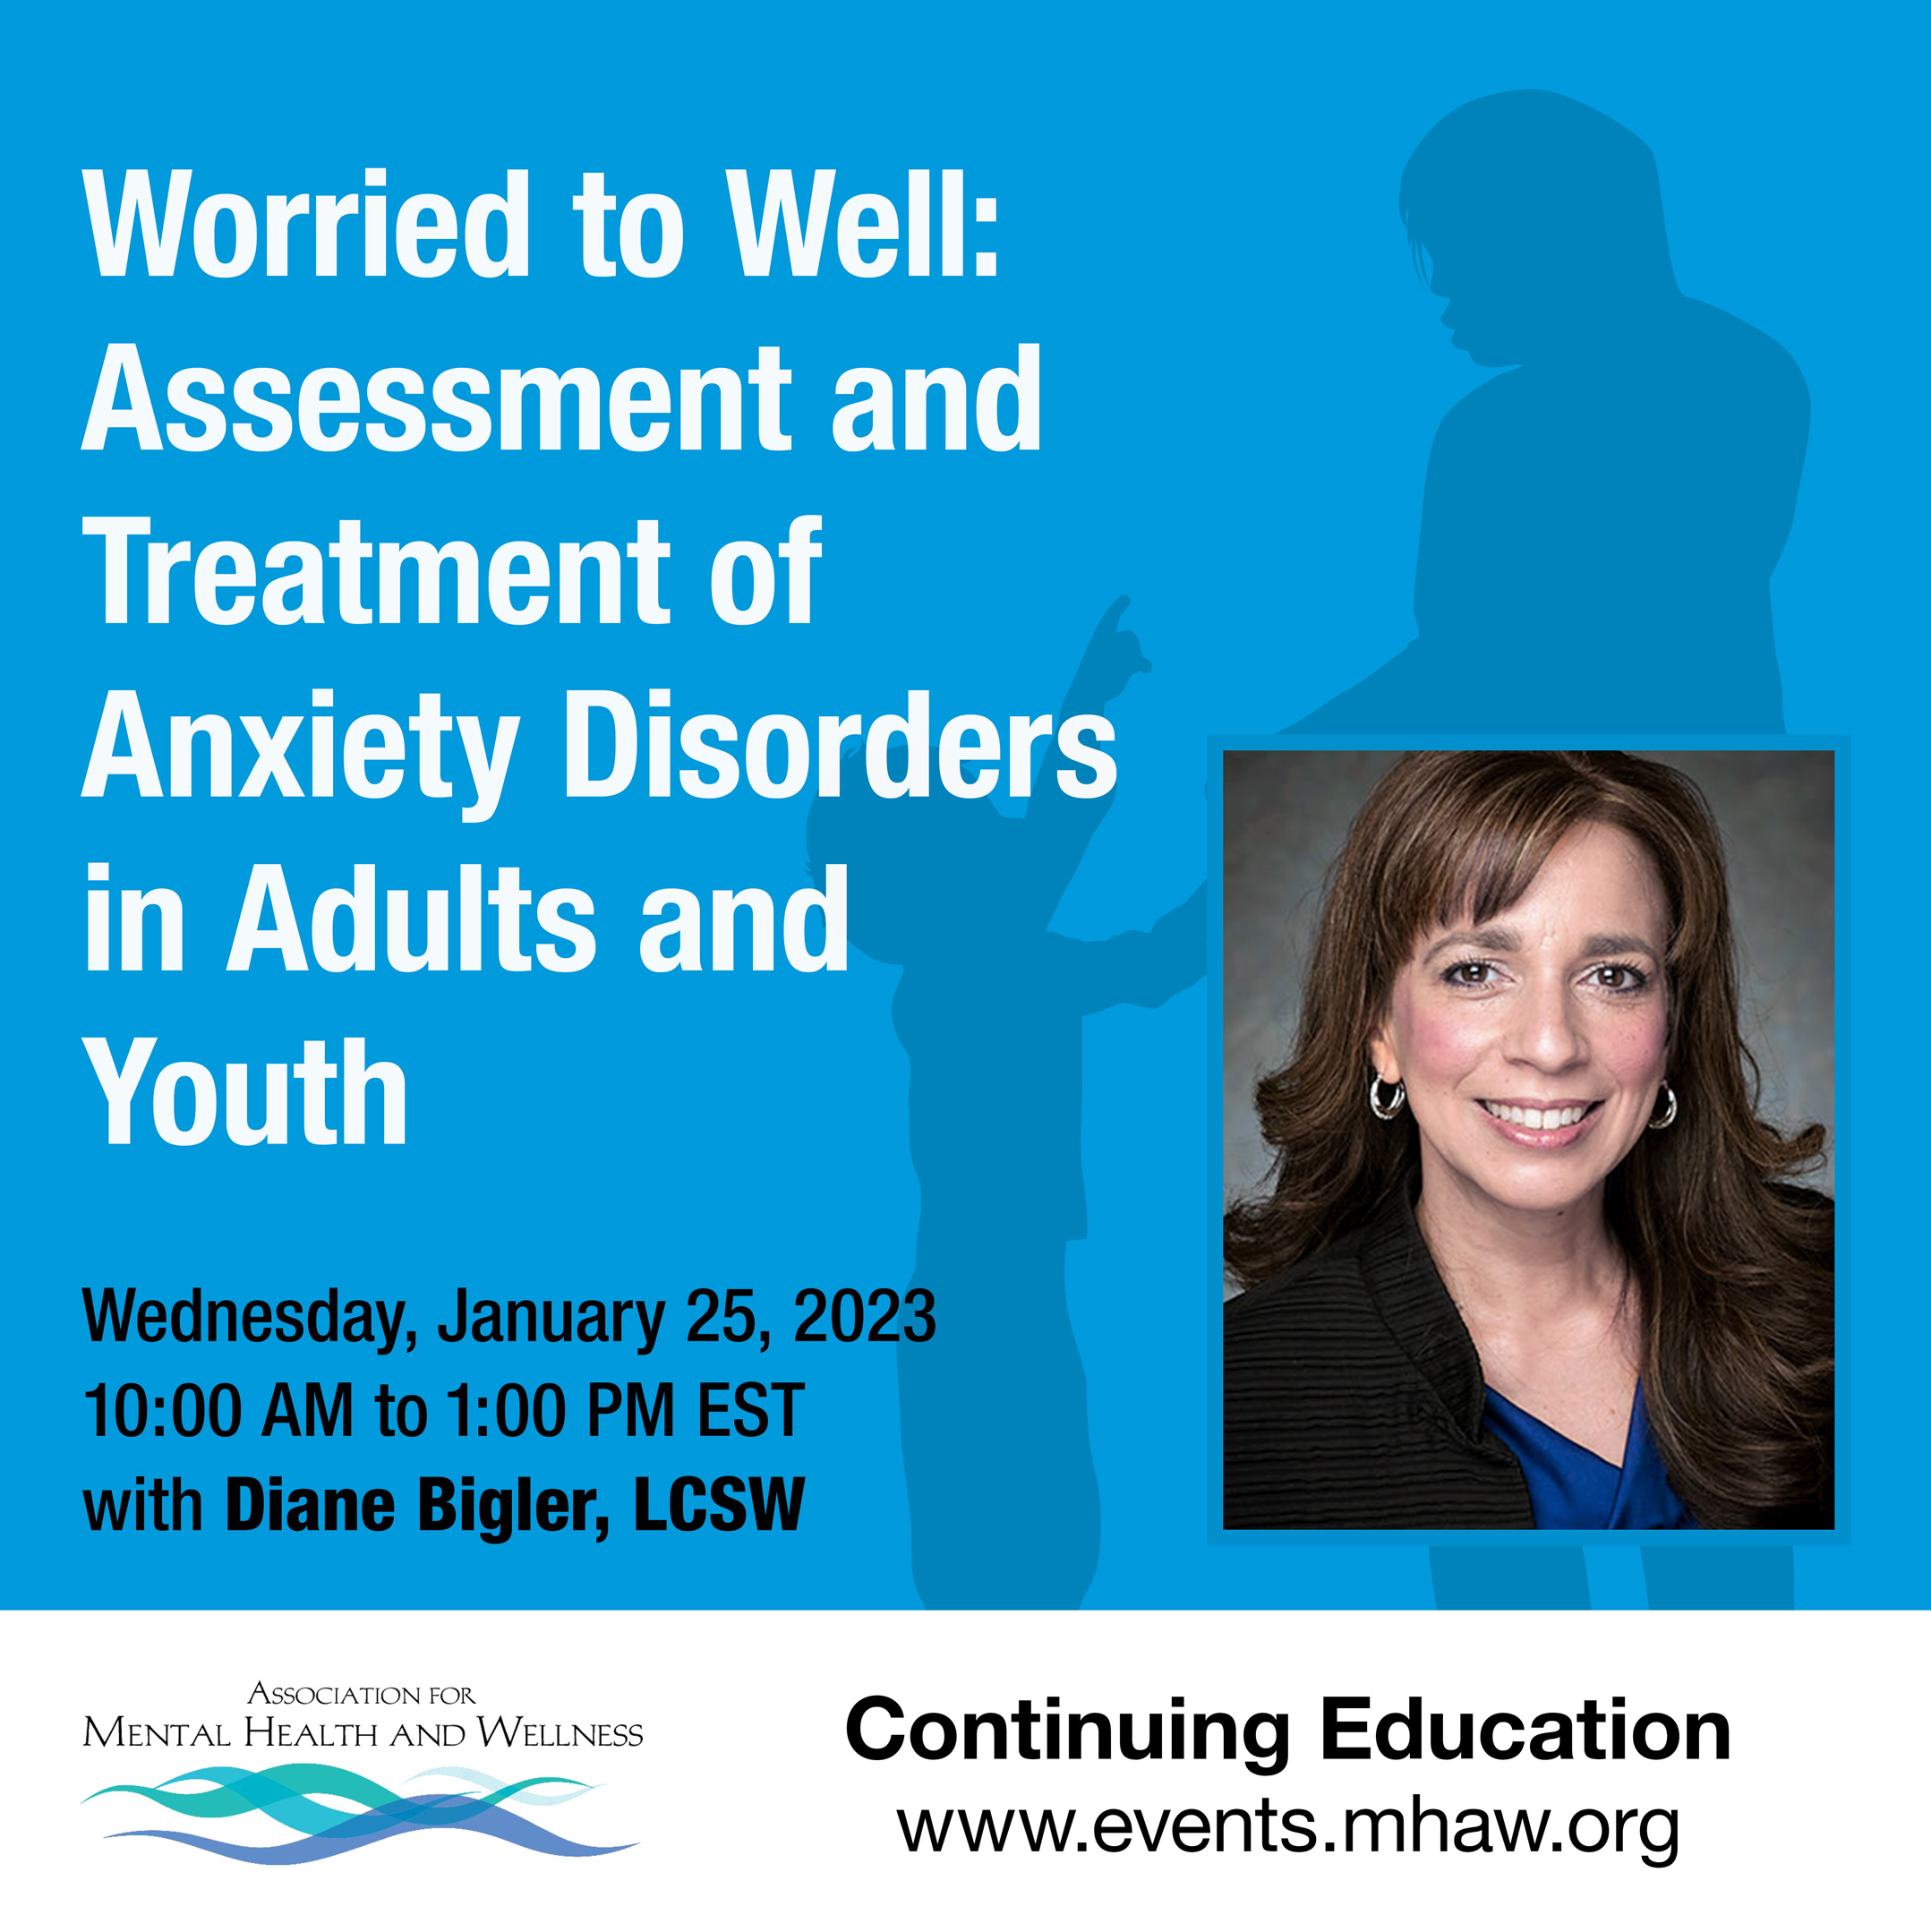 Social media image and display ad in square format for workshop by the Association for Mental Health and Wellness on treating anxiety disorders in adults and youth. The background is blue, with a muted silhouette of a child and adult talking. The text is black and white. A headshot of the speaker, Diane Bigler, LCSW, sits in the lower right.